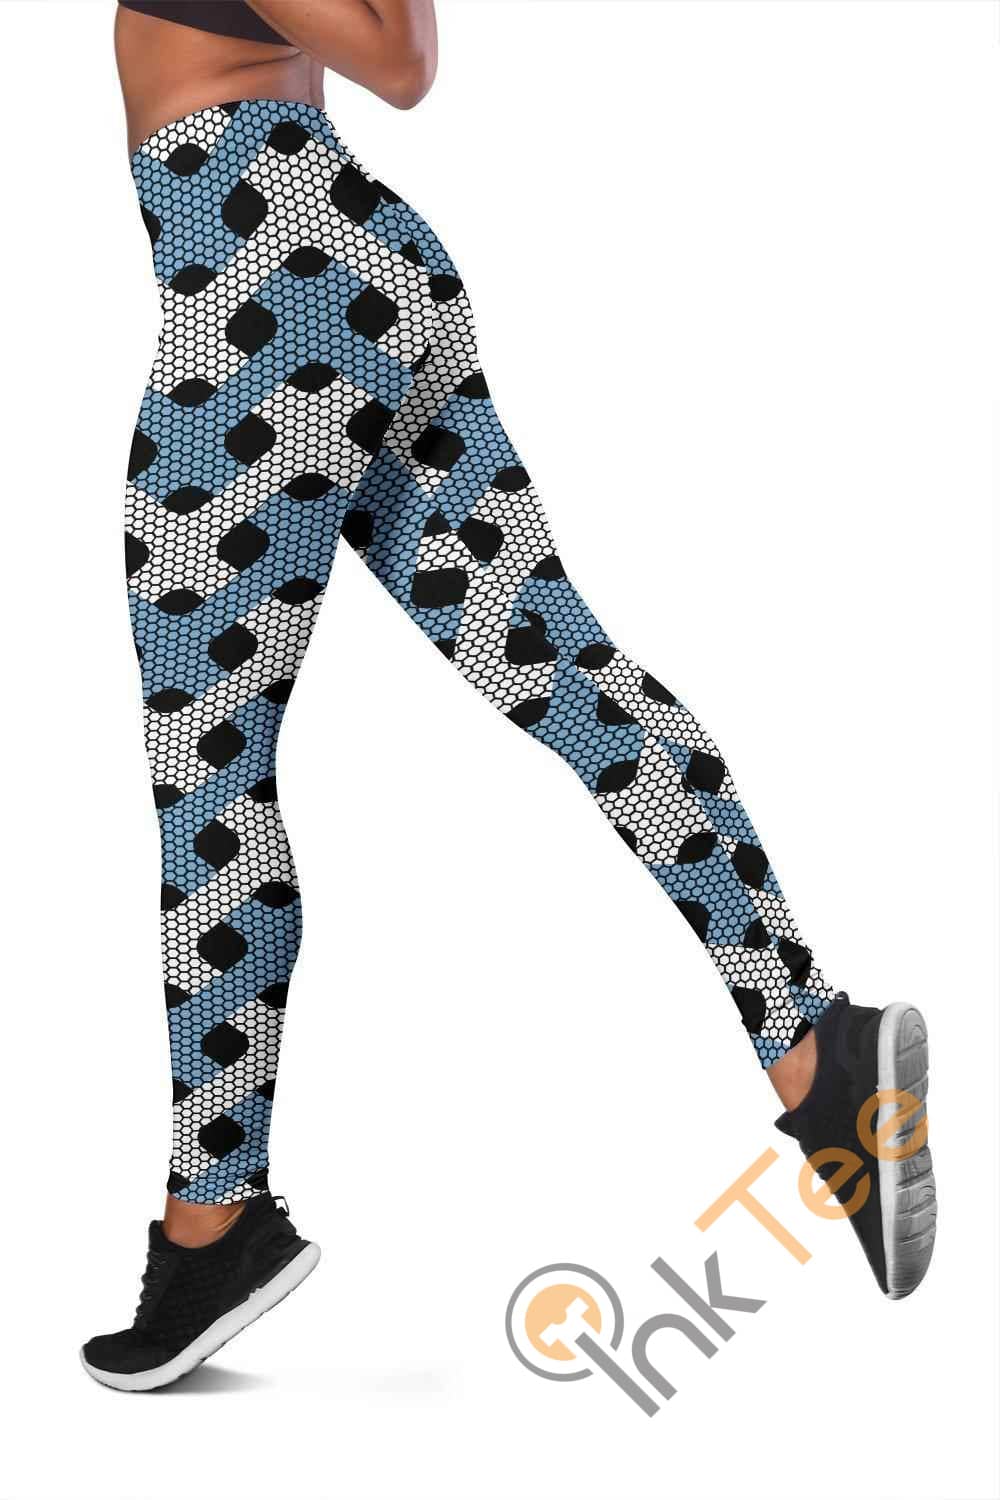 Inktee Store - North Carolina Tar Heels Inspired Liberty Green 3D All Over Print For Yoga Fitness Fashion Women'S Leggings Image